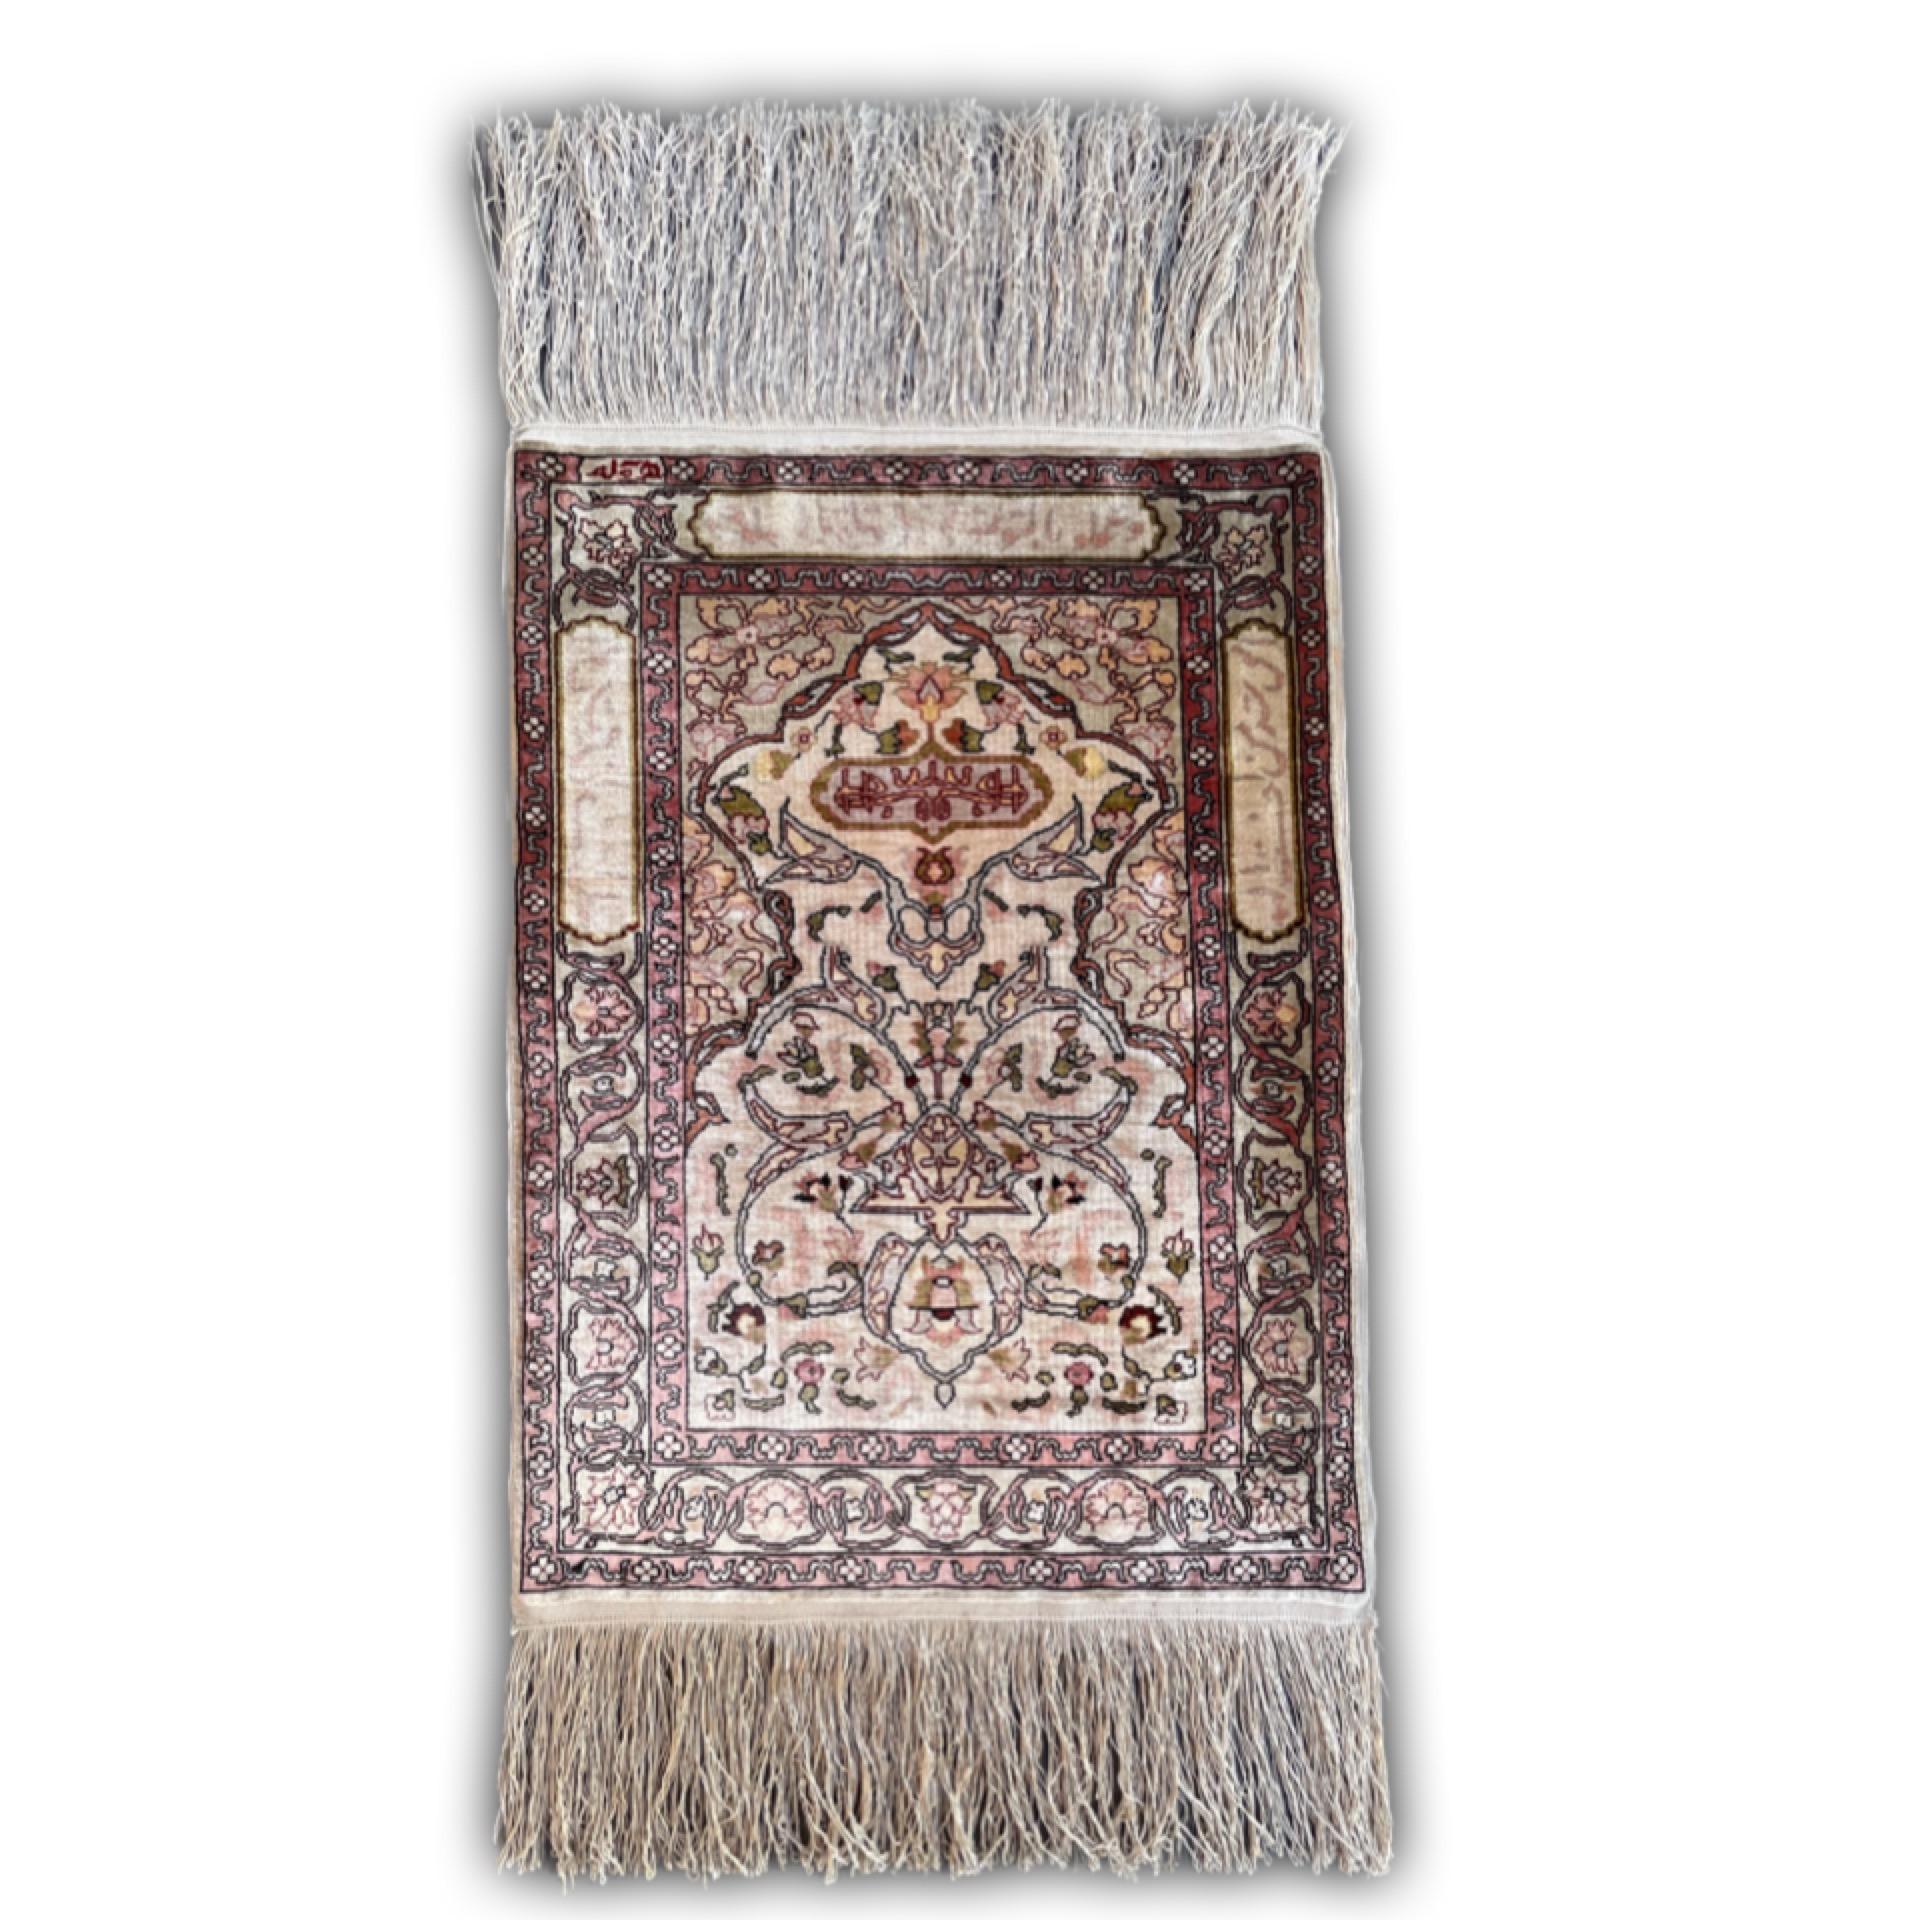 Héréké Silk prayer rug.
Turkey, mid-20th century. Signed

Hereke rugs are rugs only produced in Hereke, a coastal city in Turkey located 60 kilometers from Istanbul.
The city of Héréhé is world famous for the most beautiful silk carpets in the